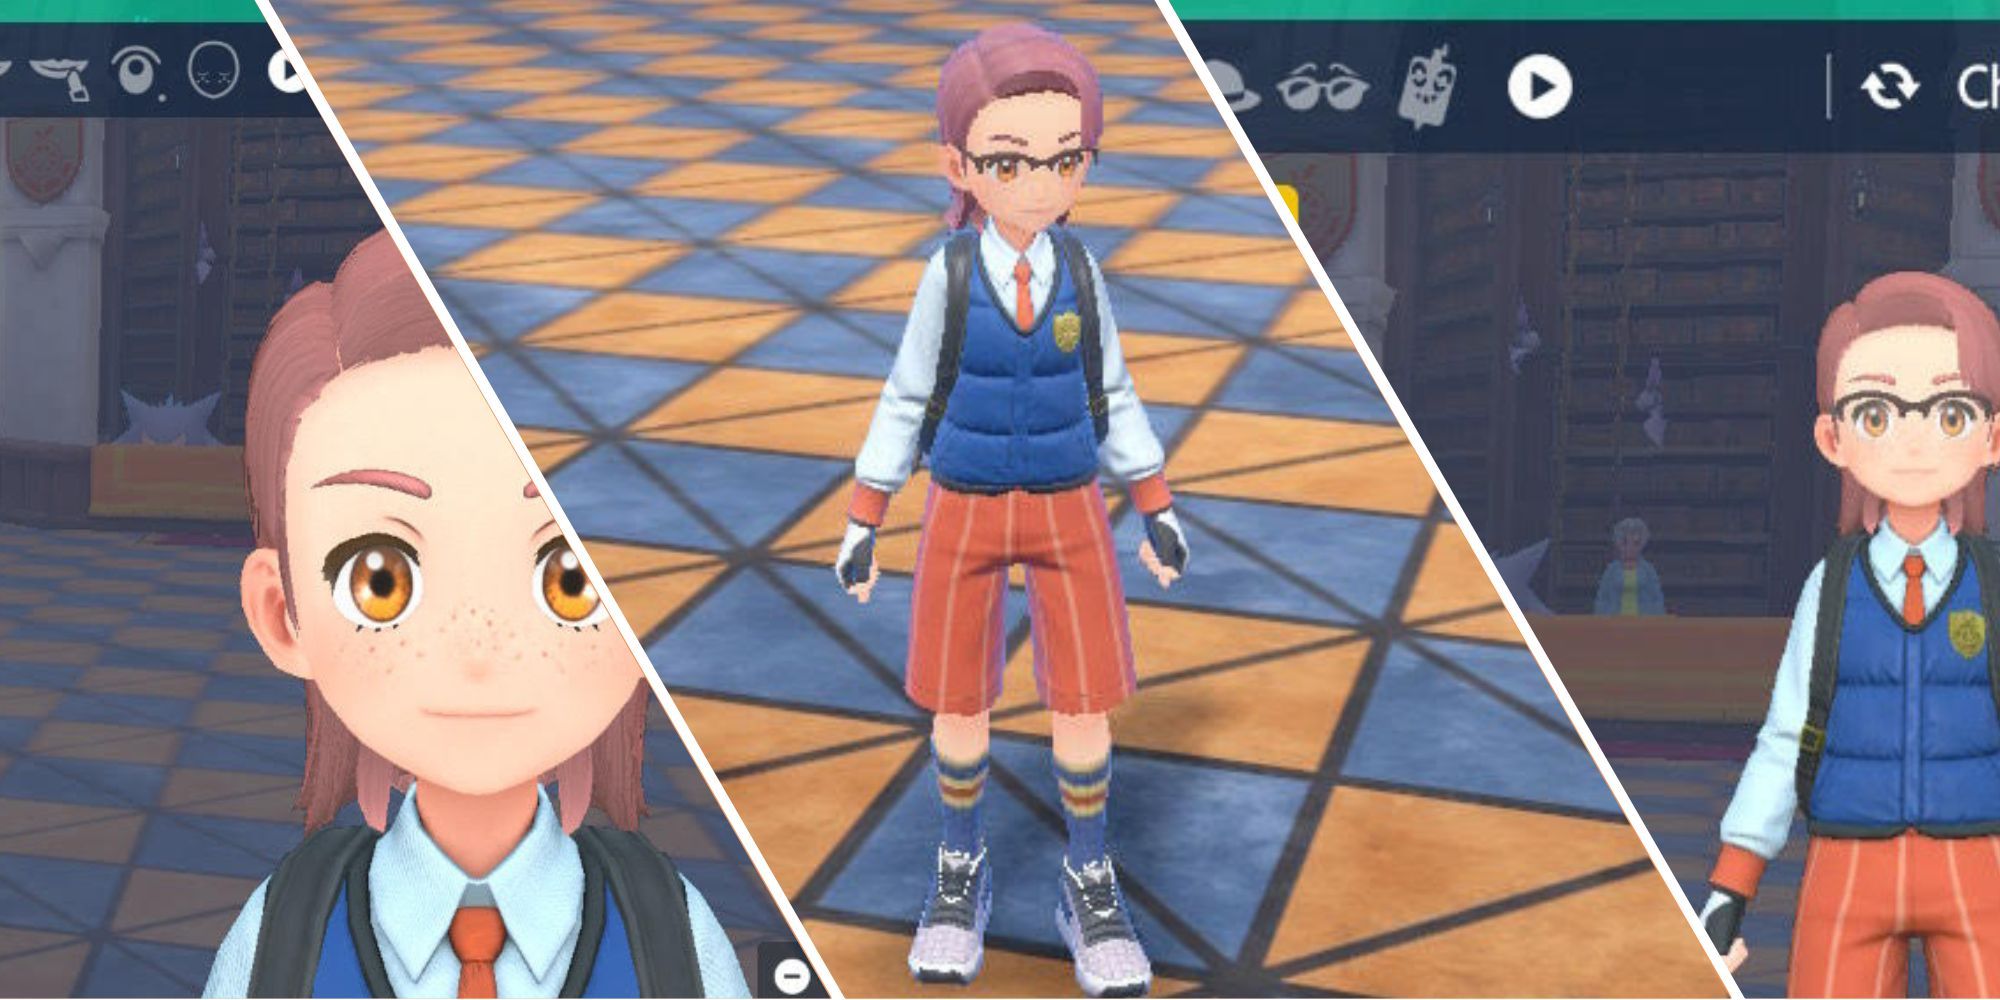 Pokémon Scarlet & Violet: How To Change Your Clothes And Hair